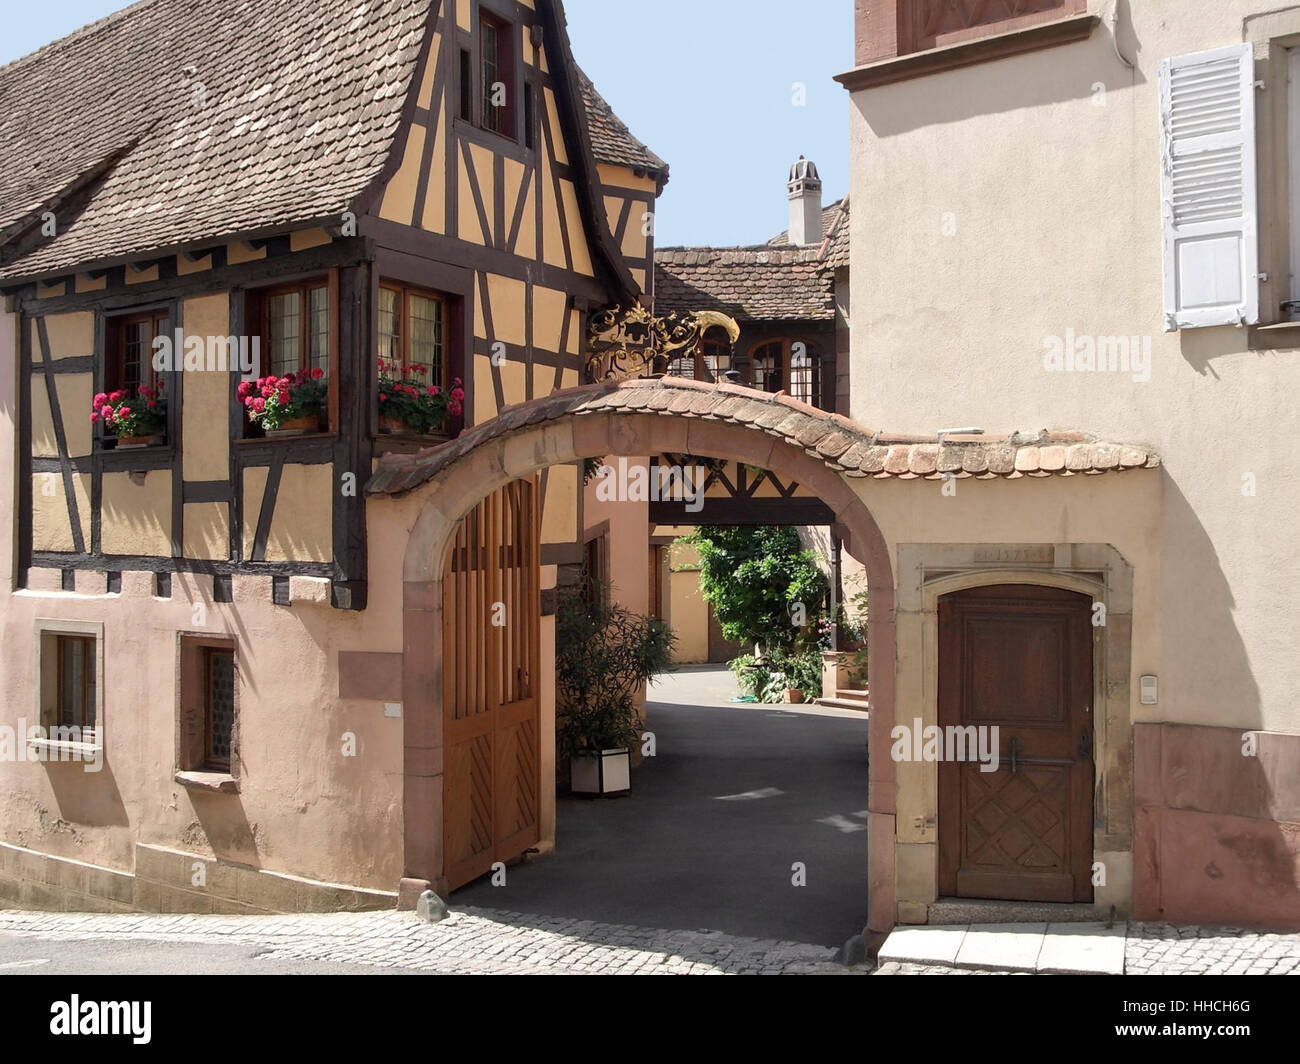 architectural detail with half-timbered house in Mittelbergheim, a village of a region in France named Alsace Stock Photo